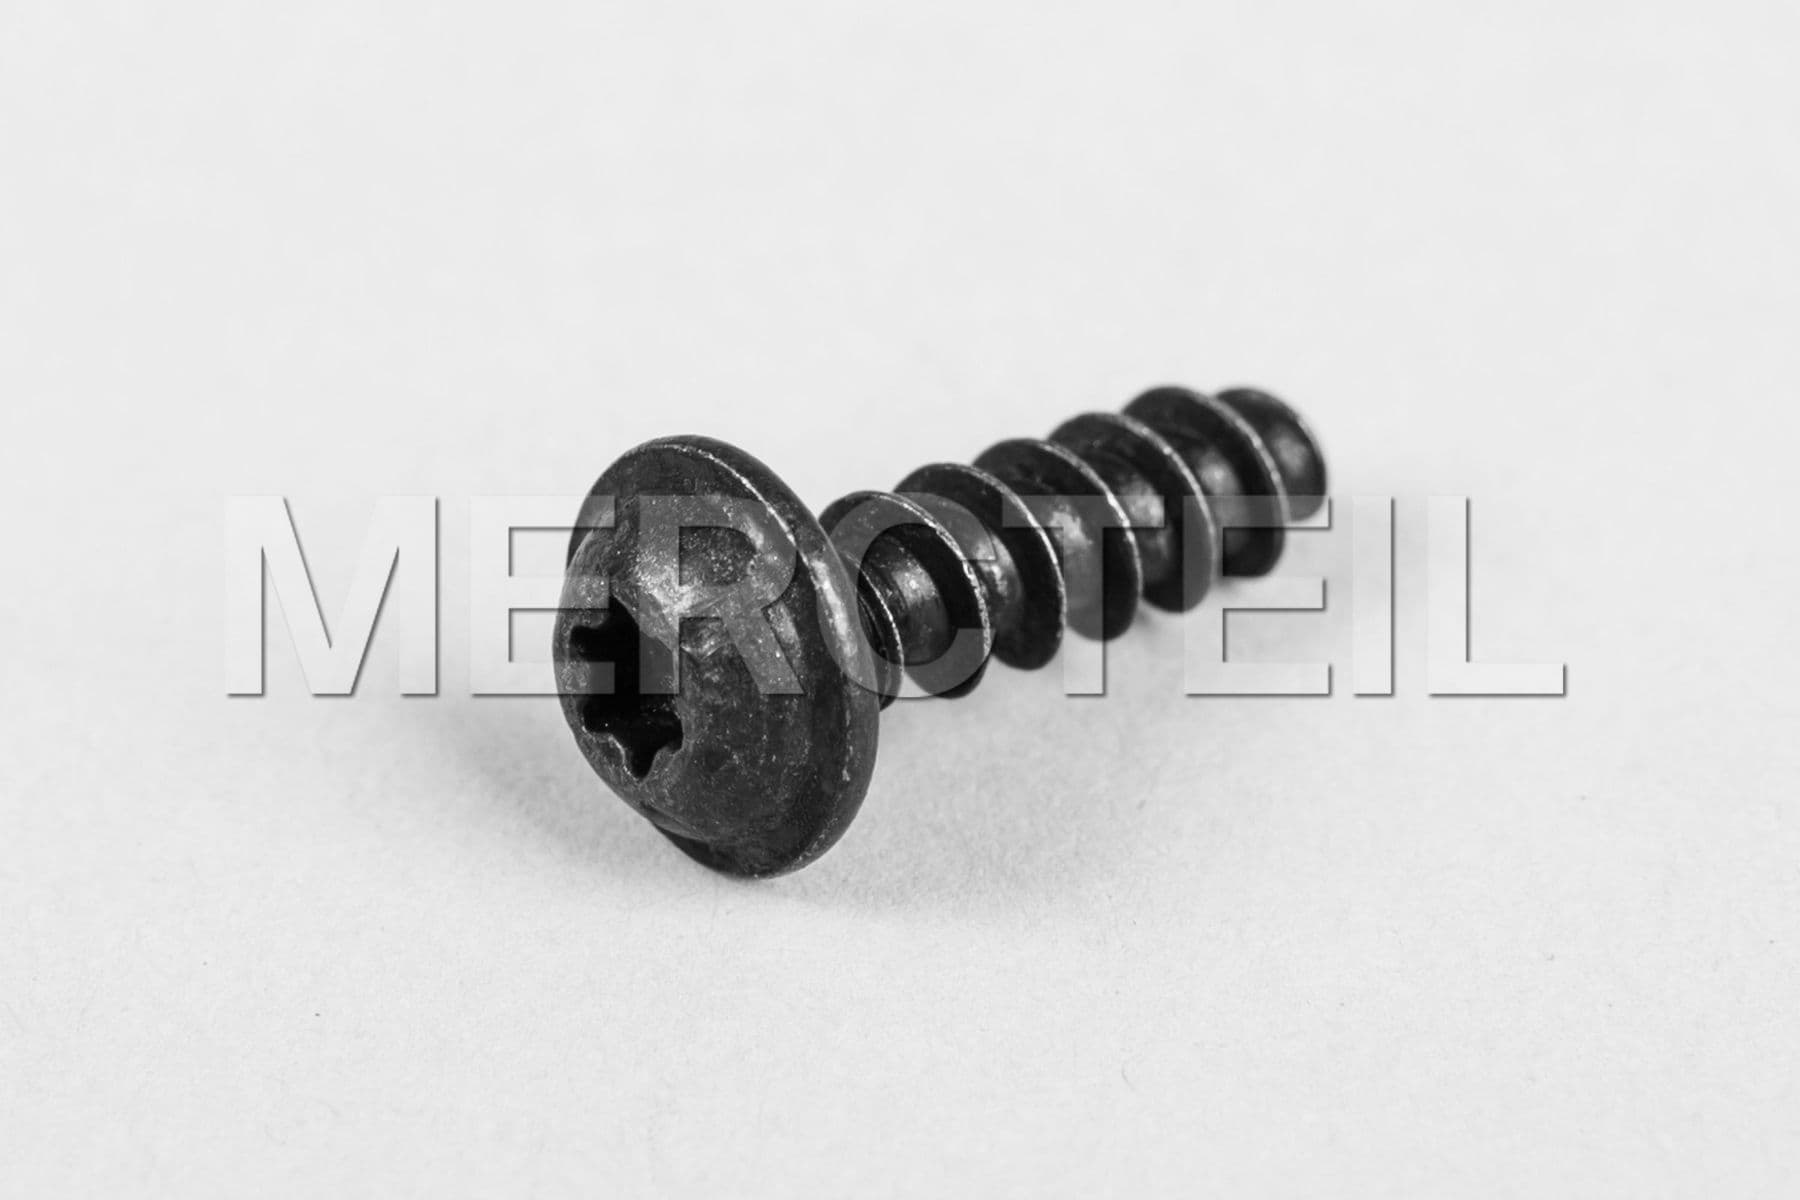 Buy the spare part Mercedes-Benz A0019846429 fillister head screw